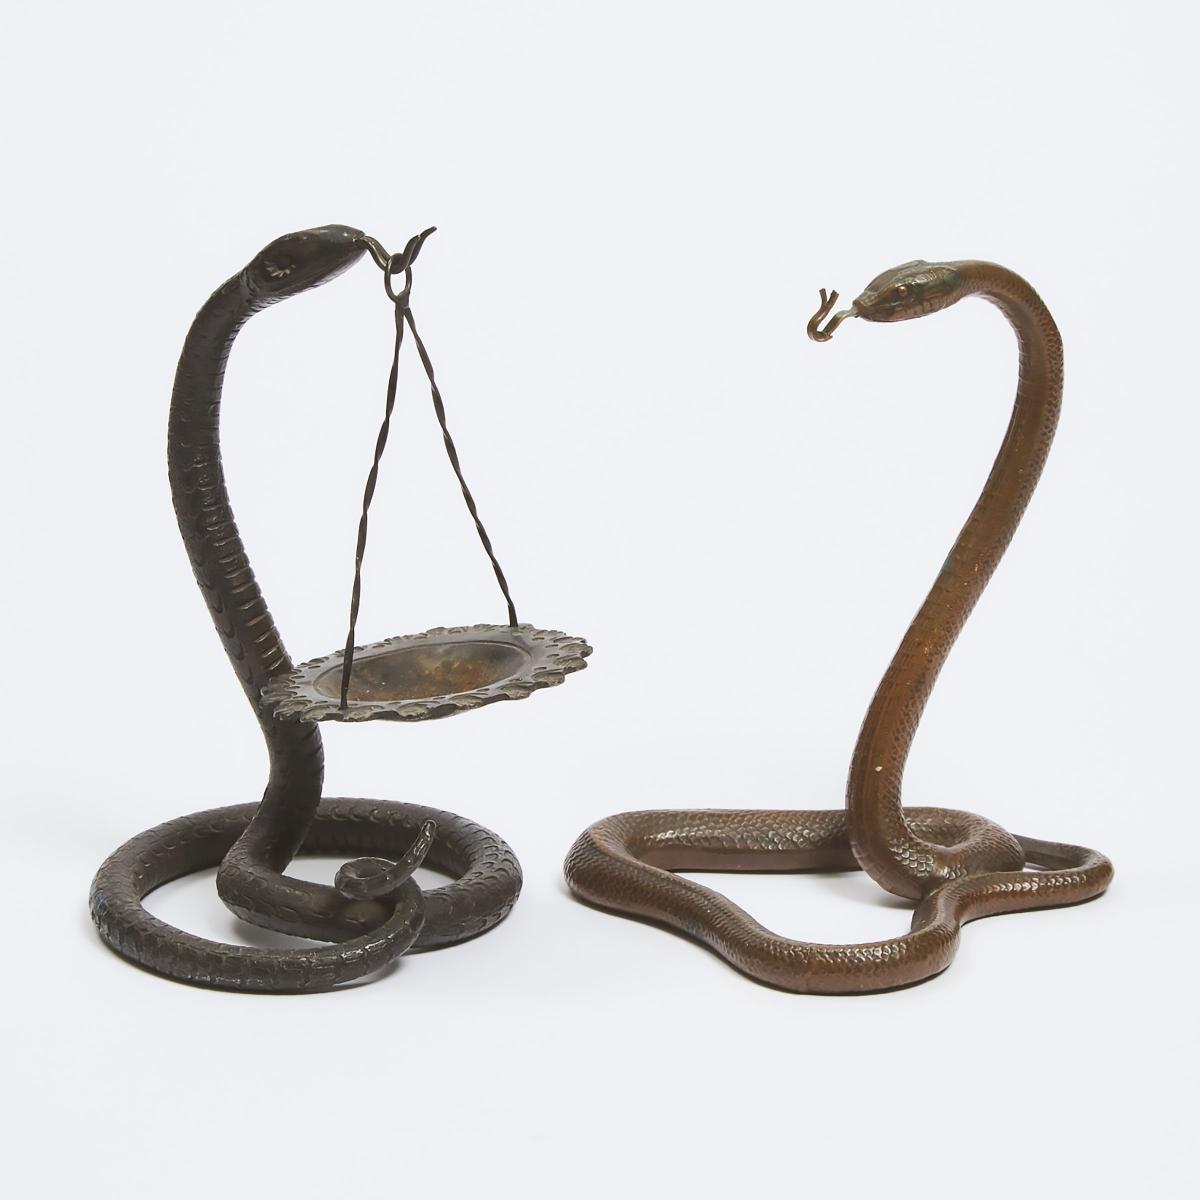 Two Austrian Serpent Form Watch Stands, c.1900, each height 6 in — 15.2 cm